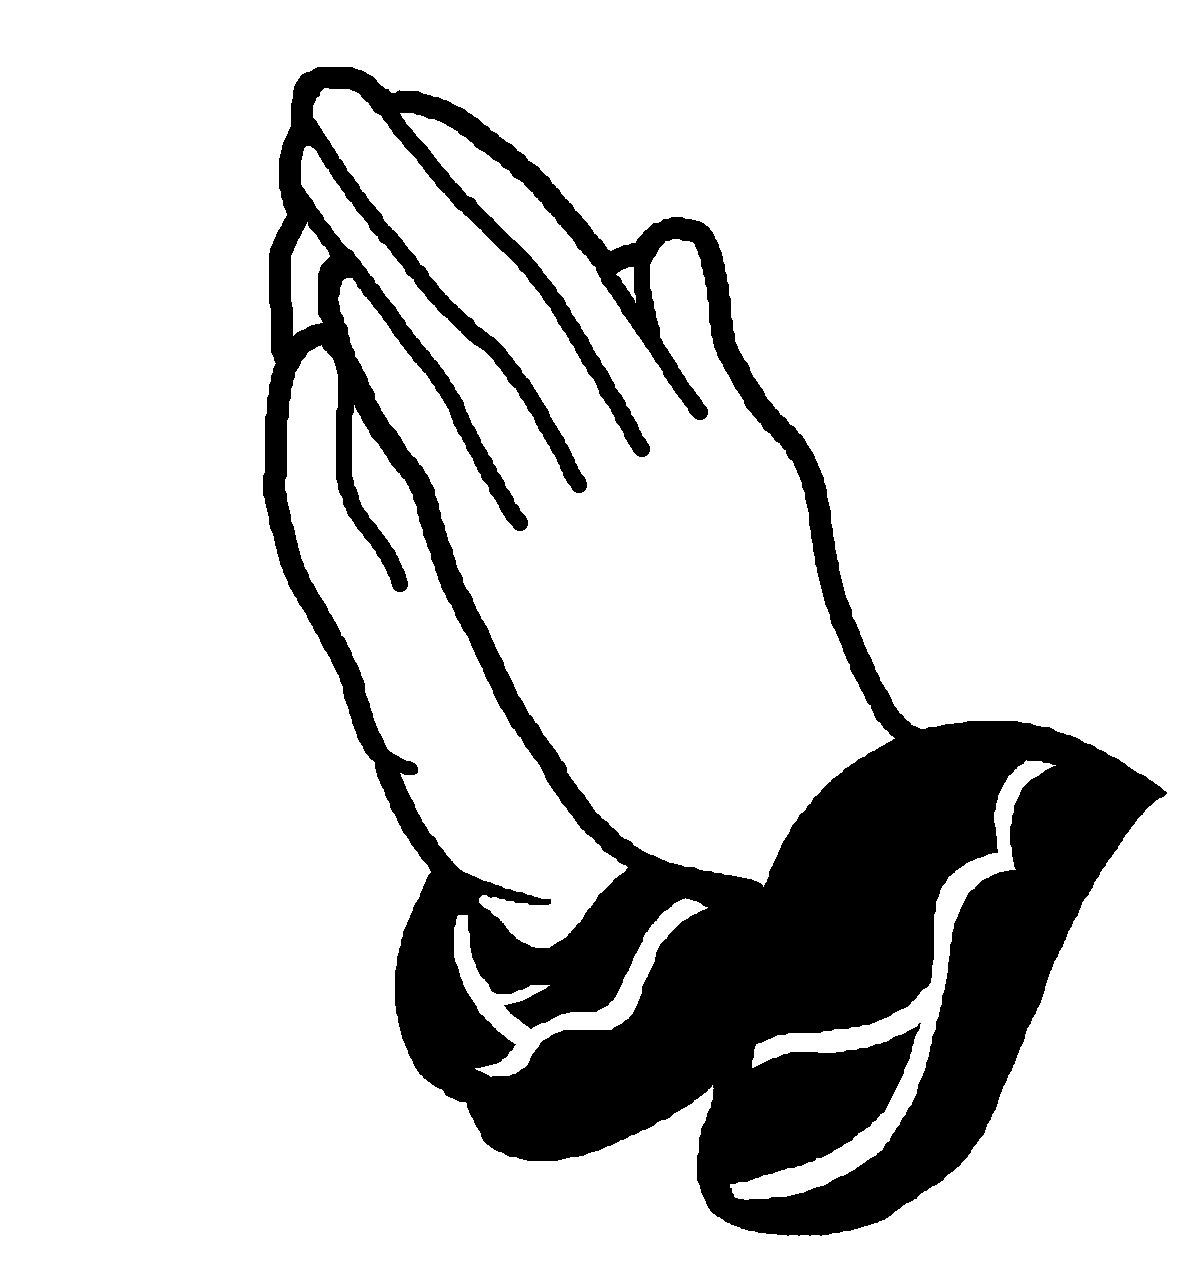 Both Hand Praying Free Cliparts That You Can Download To You